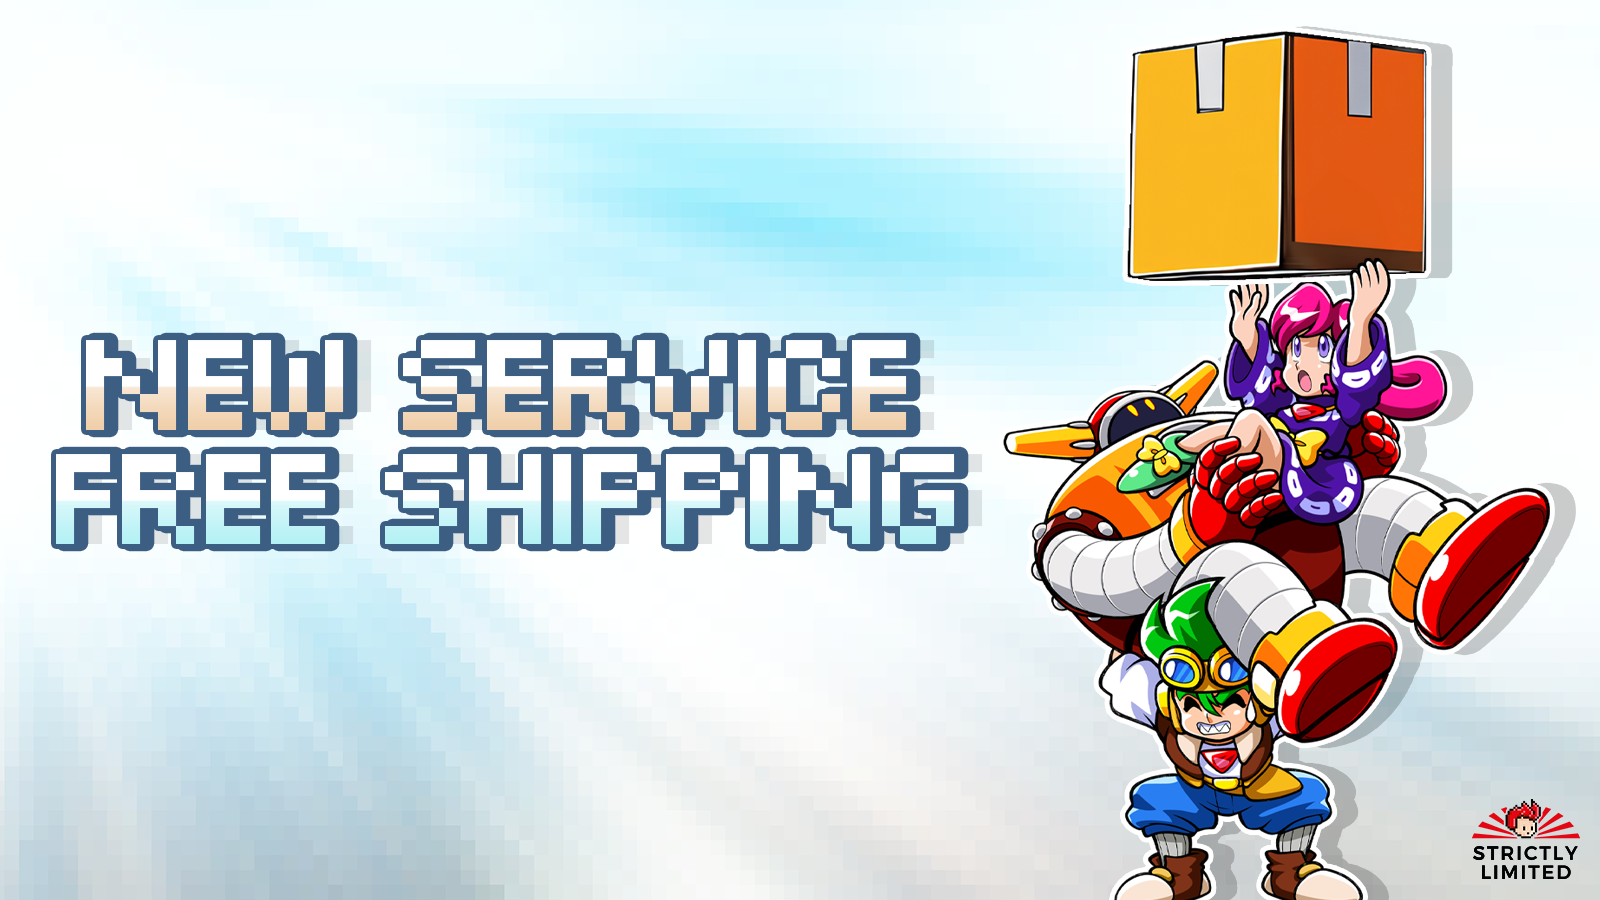 NEW: Free Shipping Service!